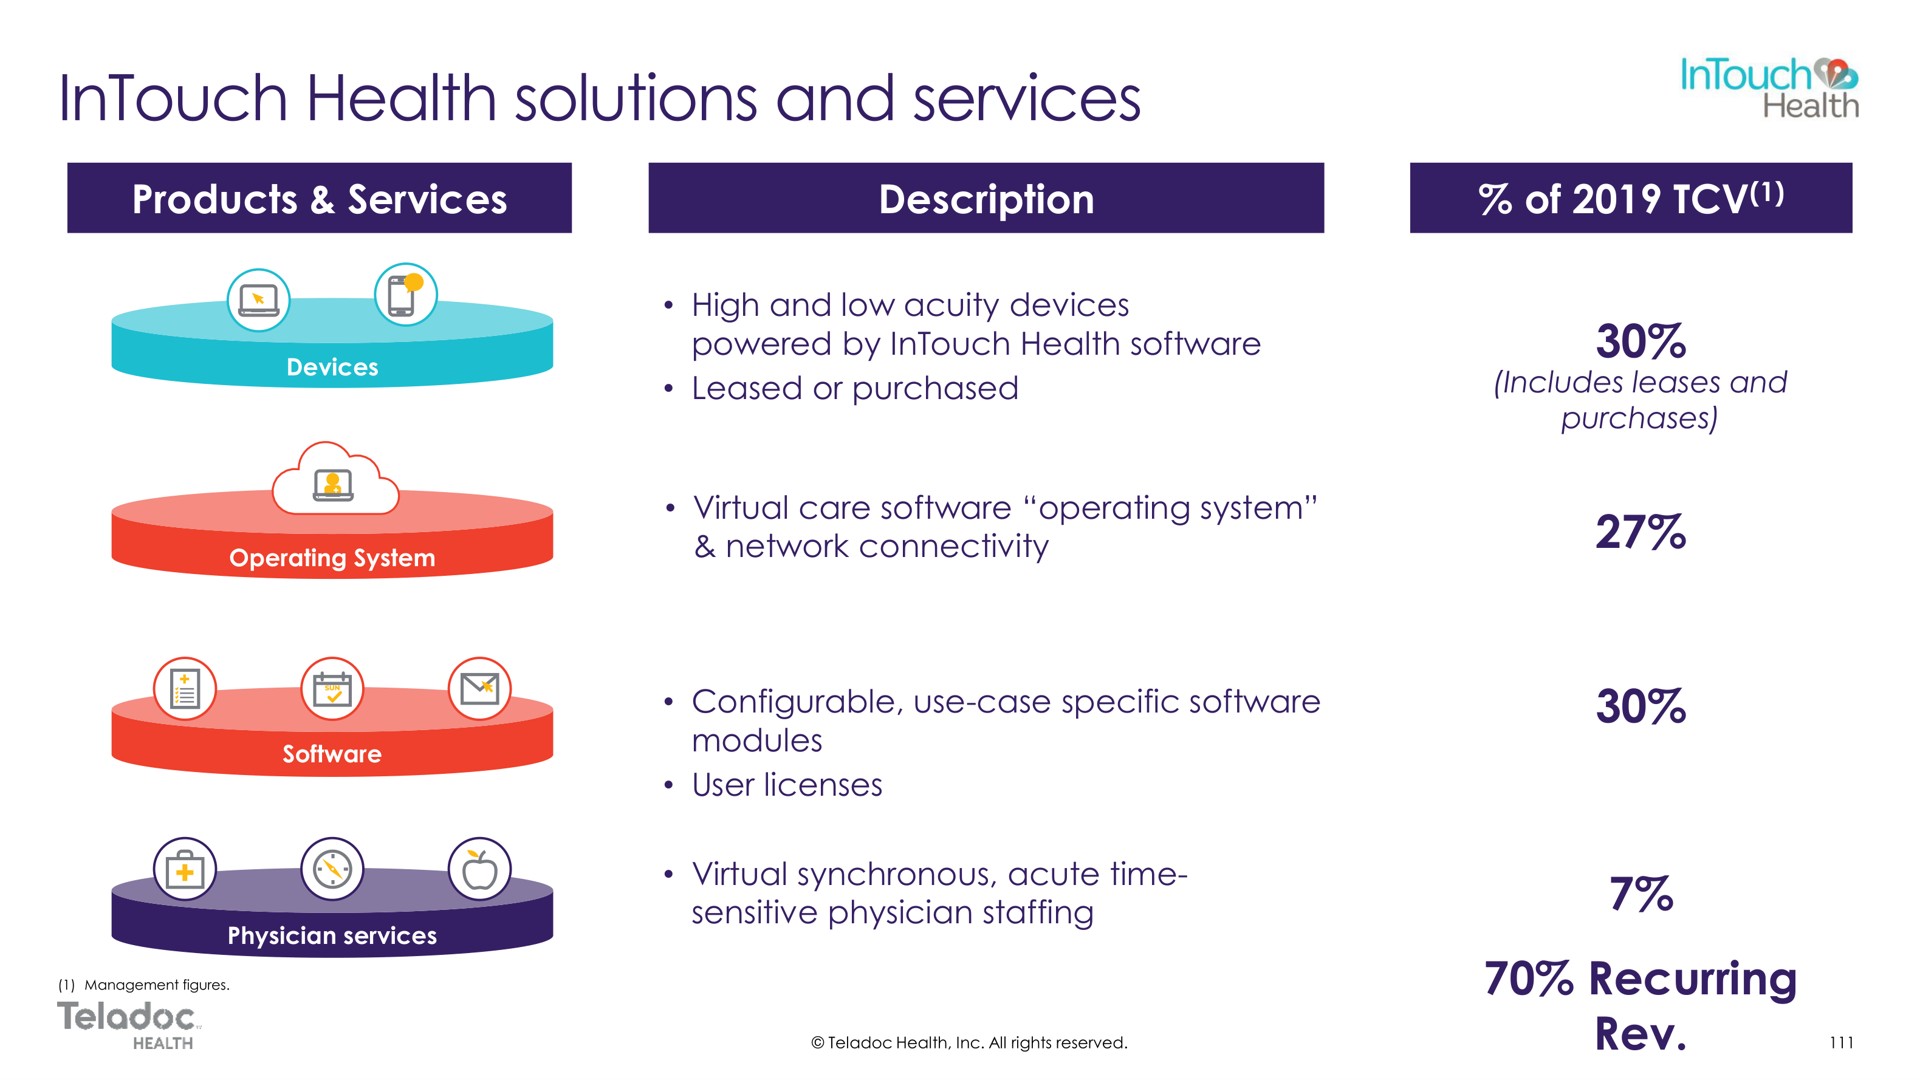 products services description of high and low acuity devices powered by health leased or purchased virtual care operating system network connectivity modules user licenses use case specific virtual synchronous acute time sensitive physician staffing recurring rev solutions | Teladoc